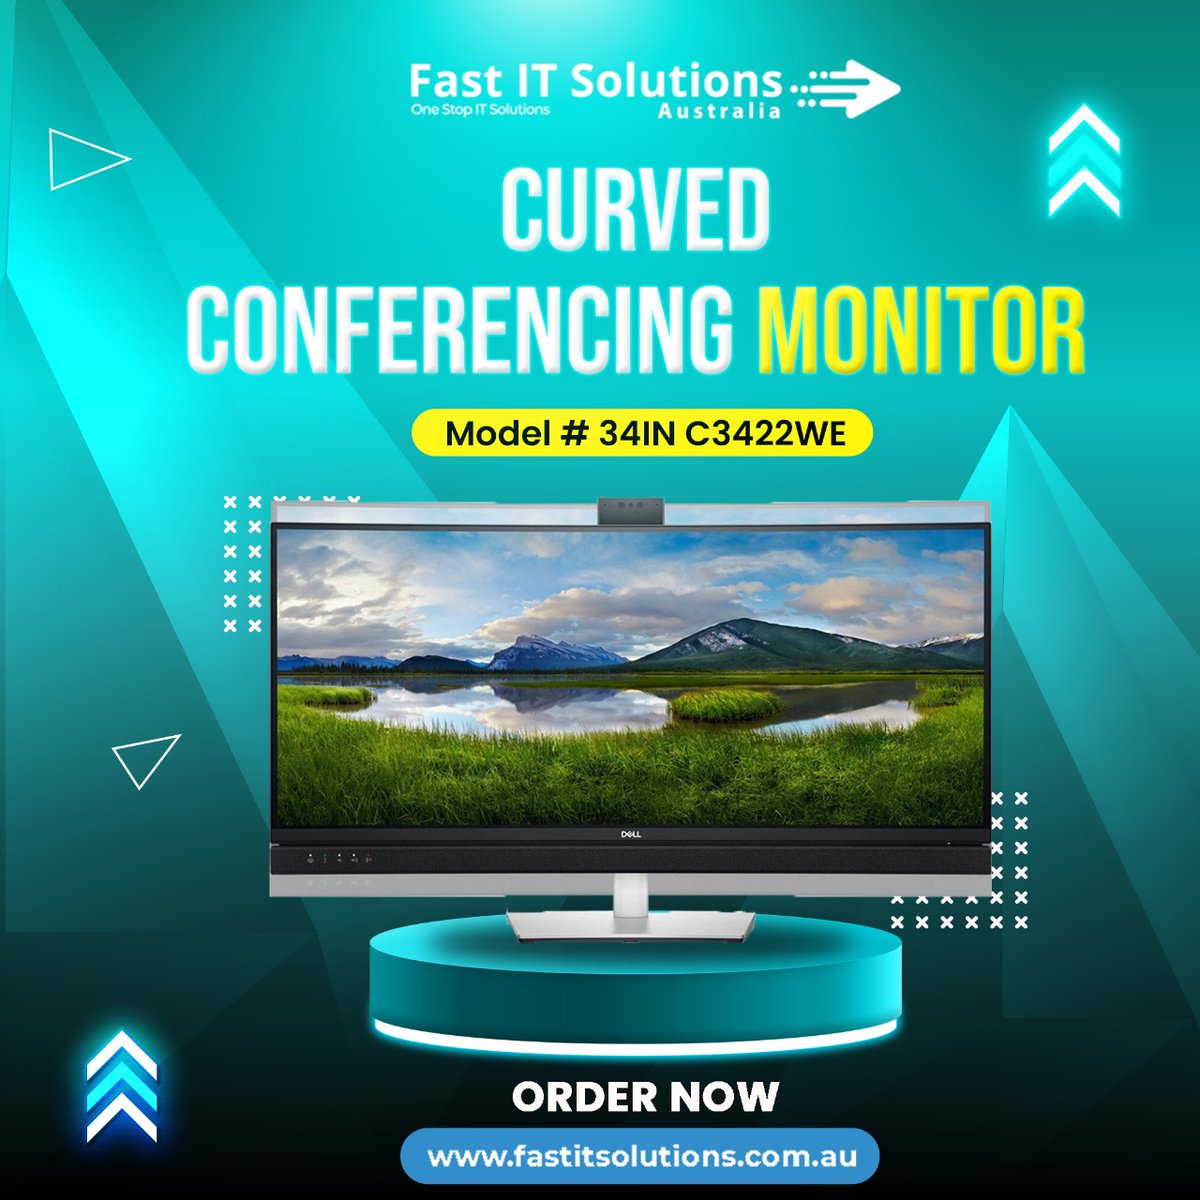 BUY Dell 34IN C3422WE Curved Video Conferencing Monitor with the following features One button.  
𝐅𝐨𝐫 𝐌𝐨𝐫𝐞 𝐃𝐞𝐭𝐚𝐢𝐥𝐬: 𝐂𝐨𝐧𝐭𝐚𝐜𝐭: +61 491 678 165  𝐖𝐞𝐛𝐬𝐢𝐭𝐞: fastitsolutions.com.au